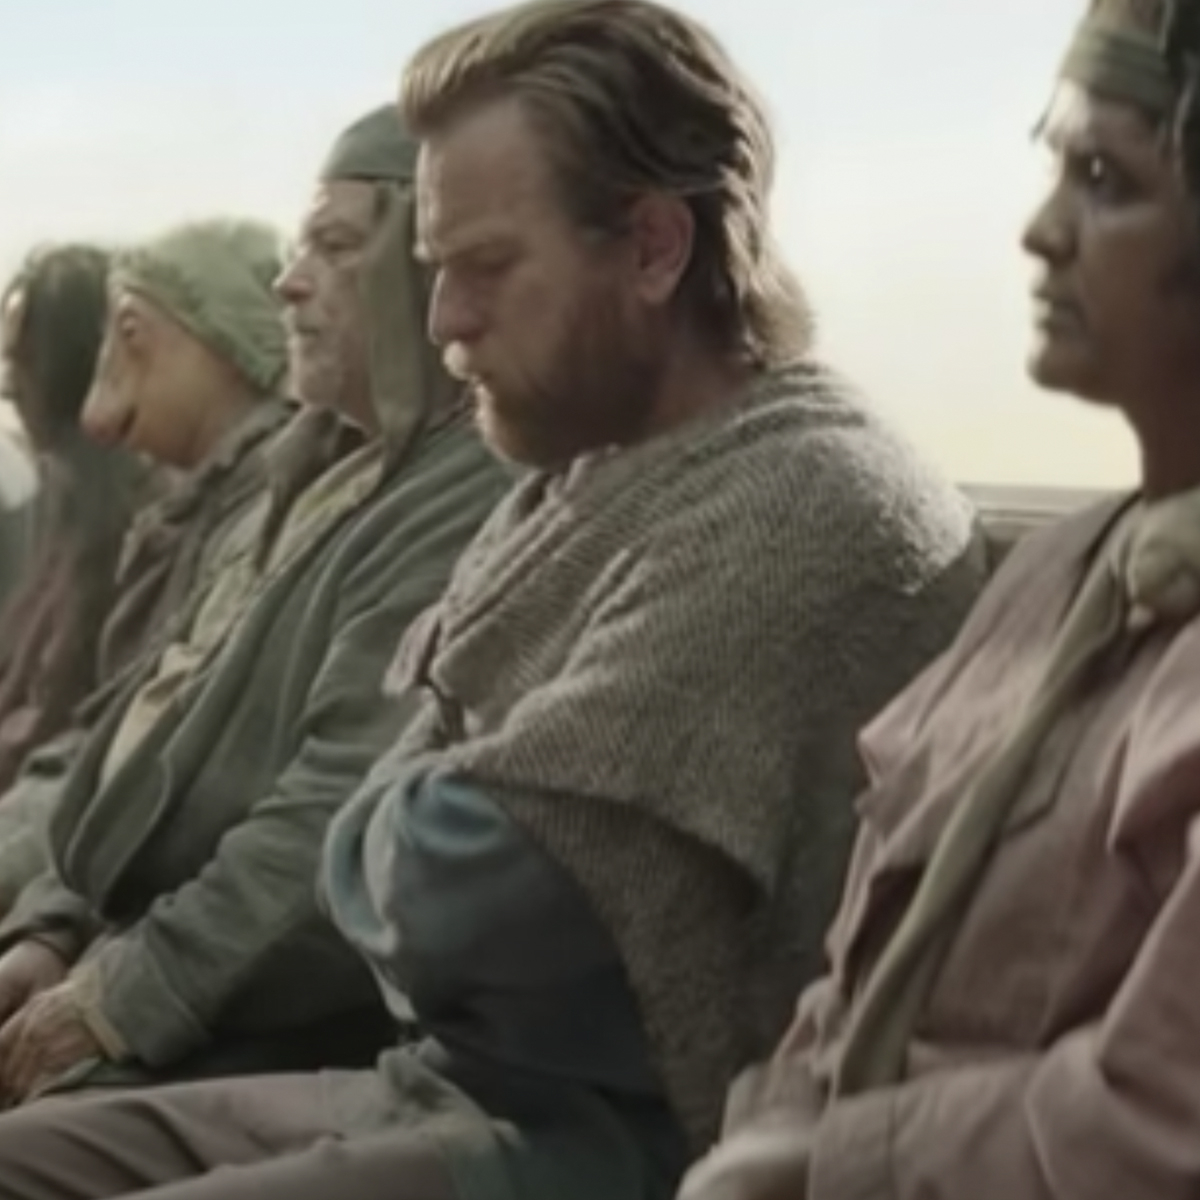 Star Wars' Makes Rare Statement on Racism Amid Attacks on Moses Ingram